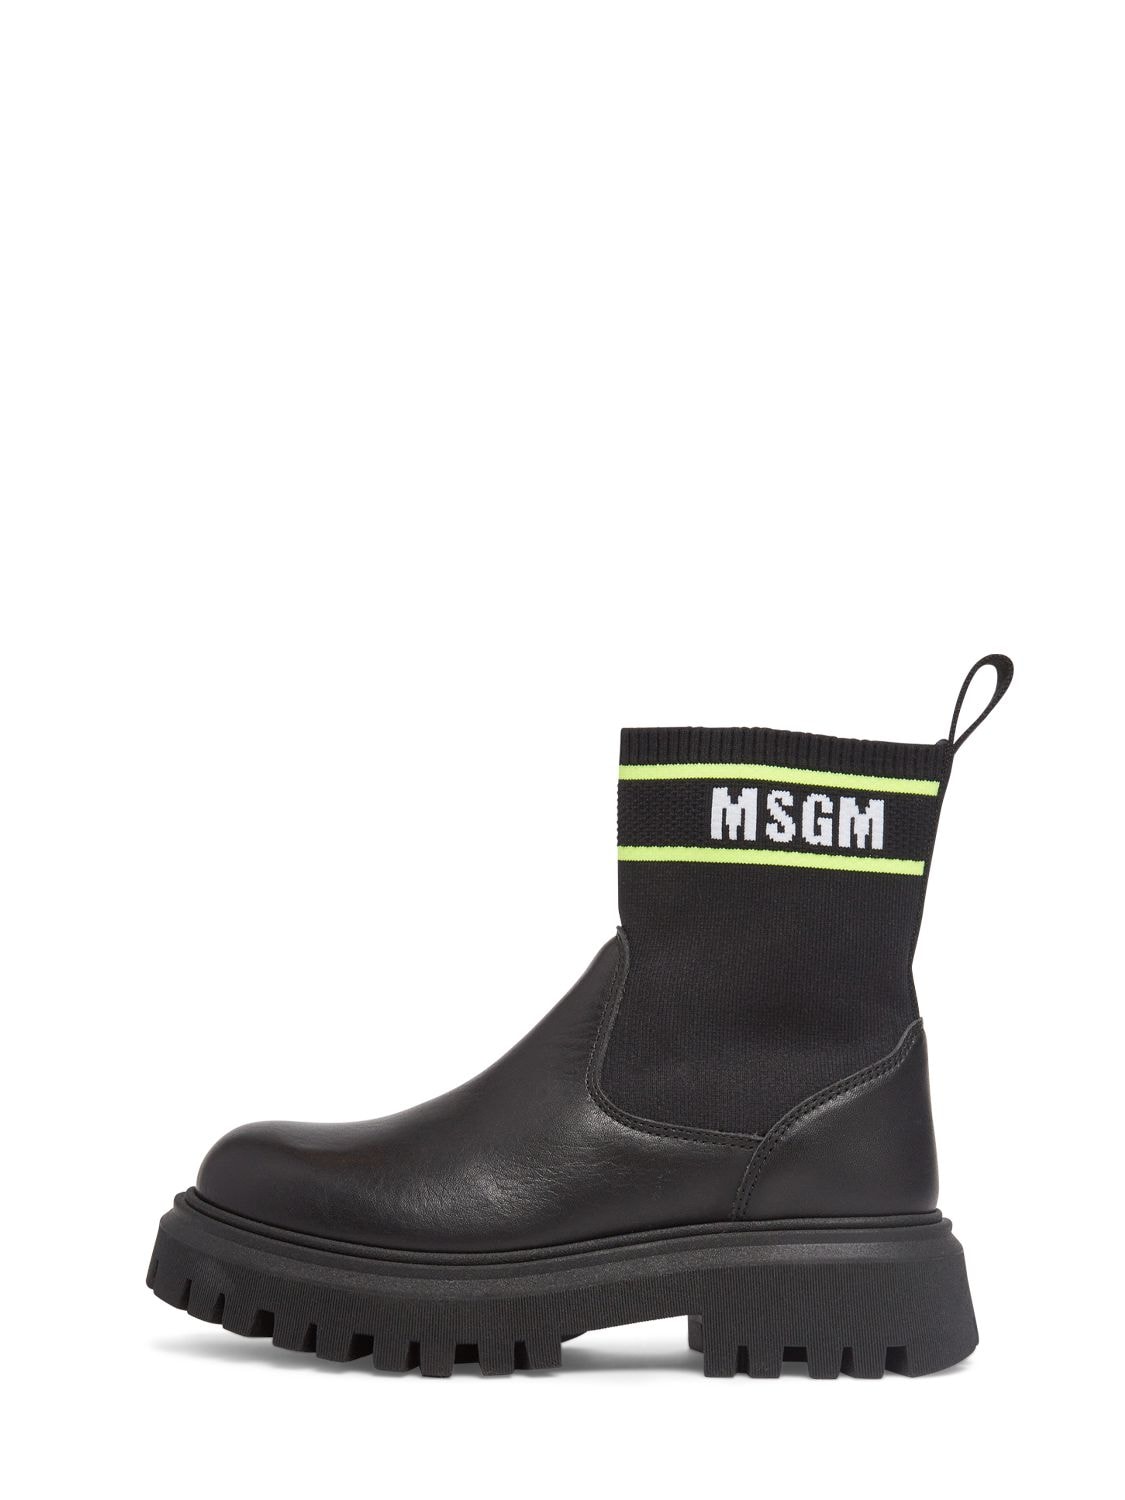 Msgm Kids' Leather & Knit Pull On Boots W/logo In Black